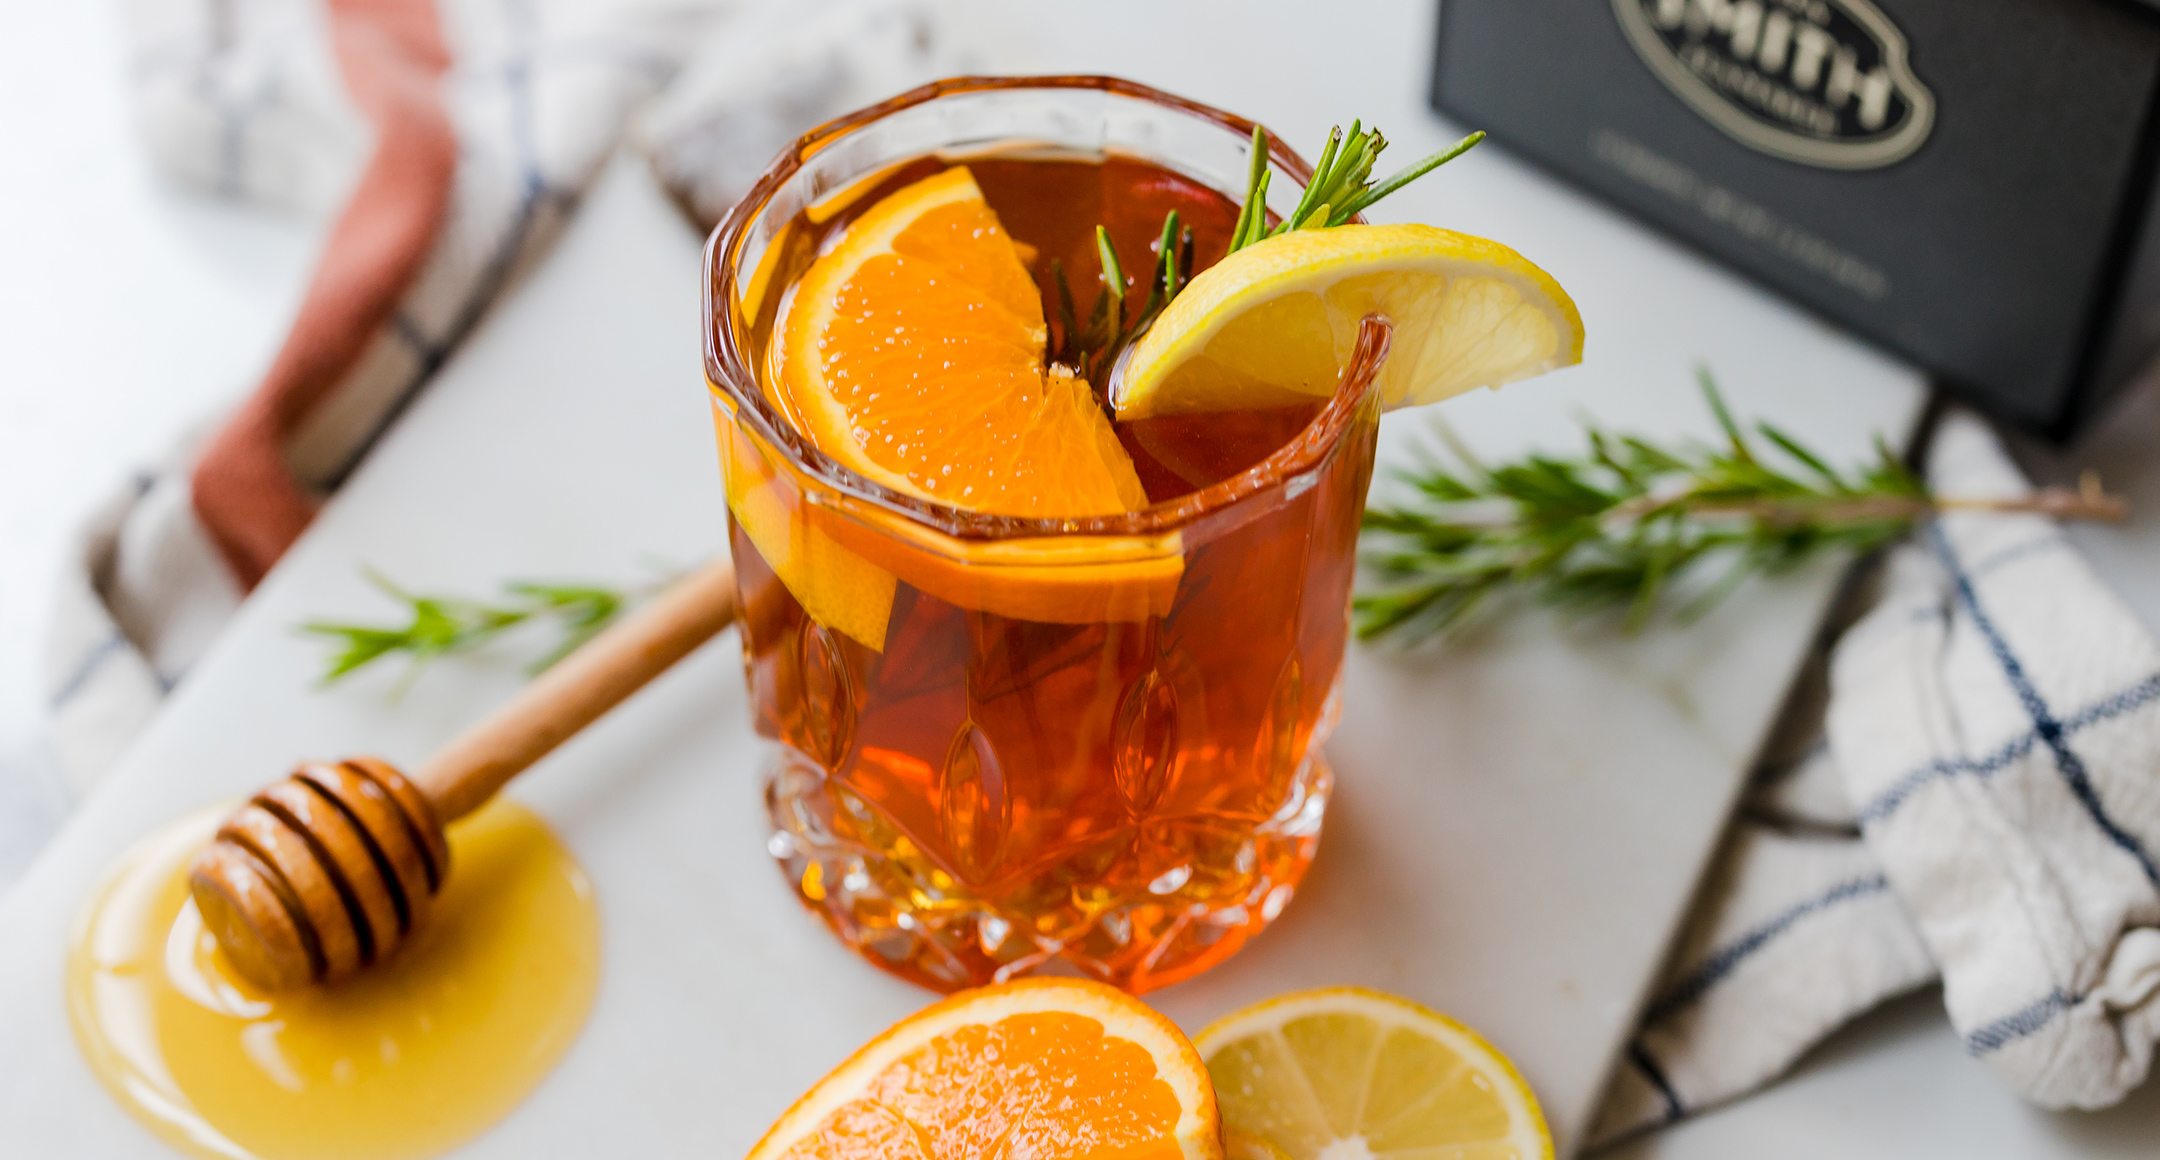 A clear glass of hot toddy garnished with sliced orange, lemon, and a spring of fresh rosemary.